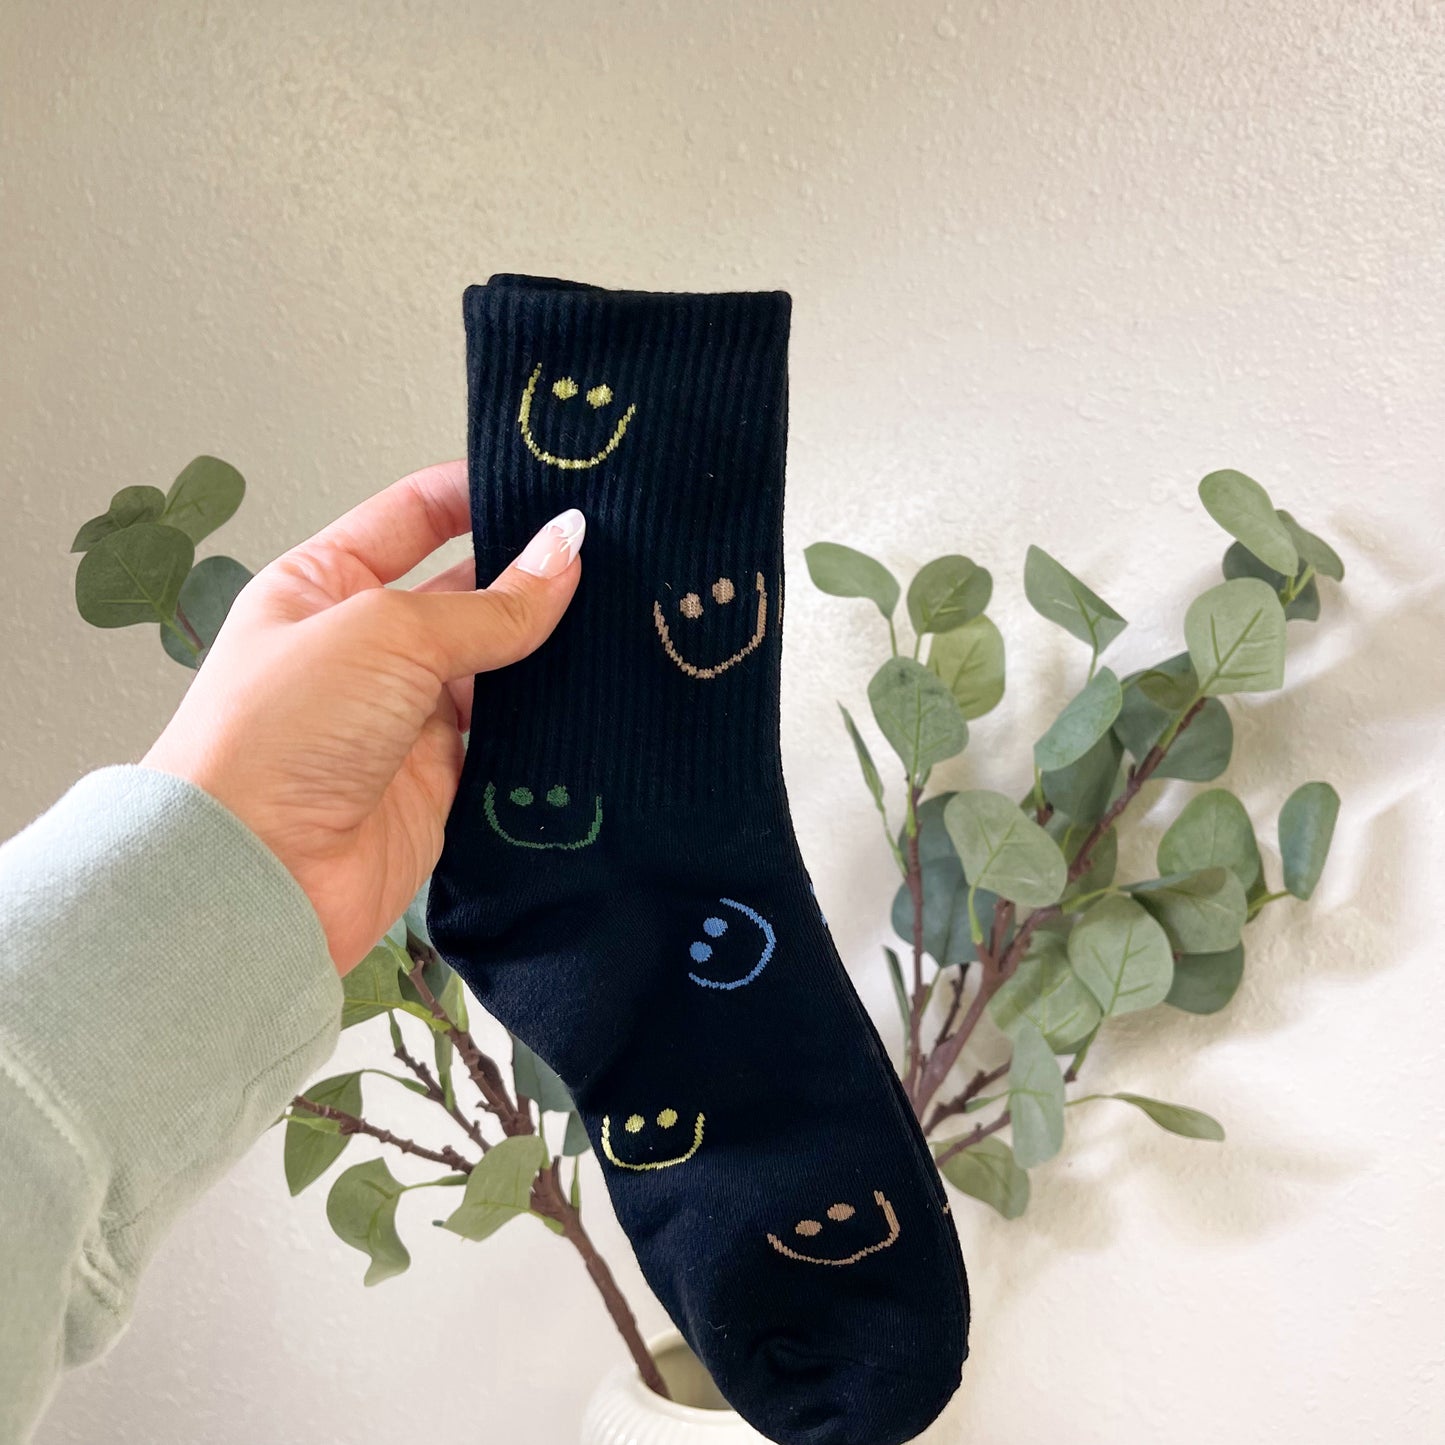 Colorful smiley faces socks